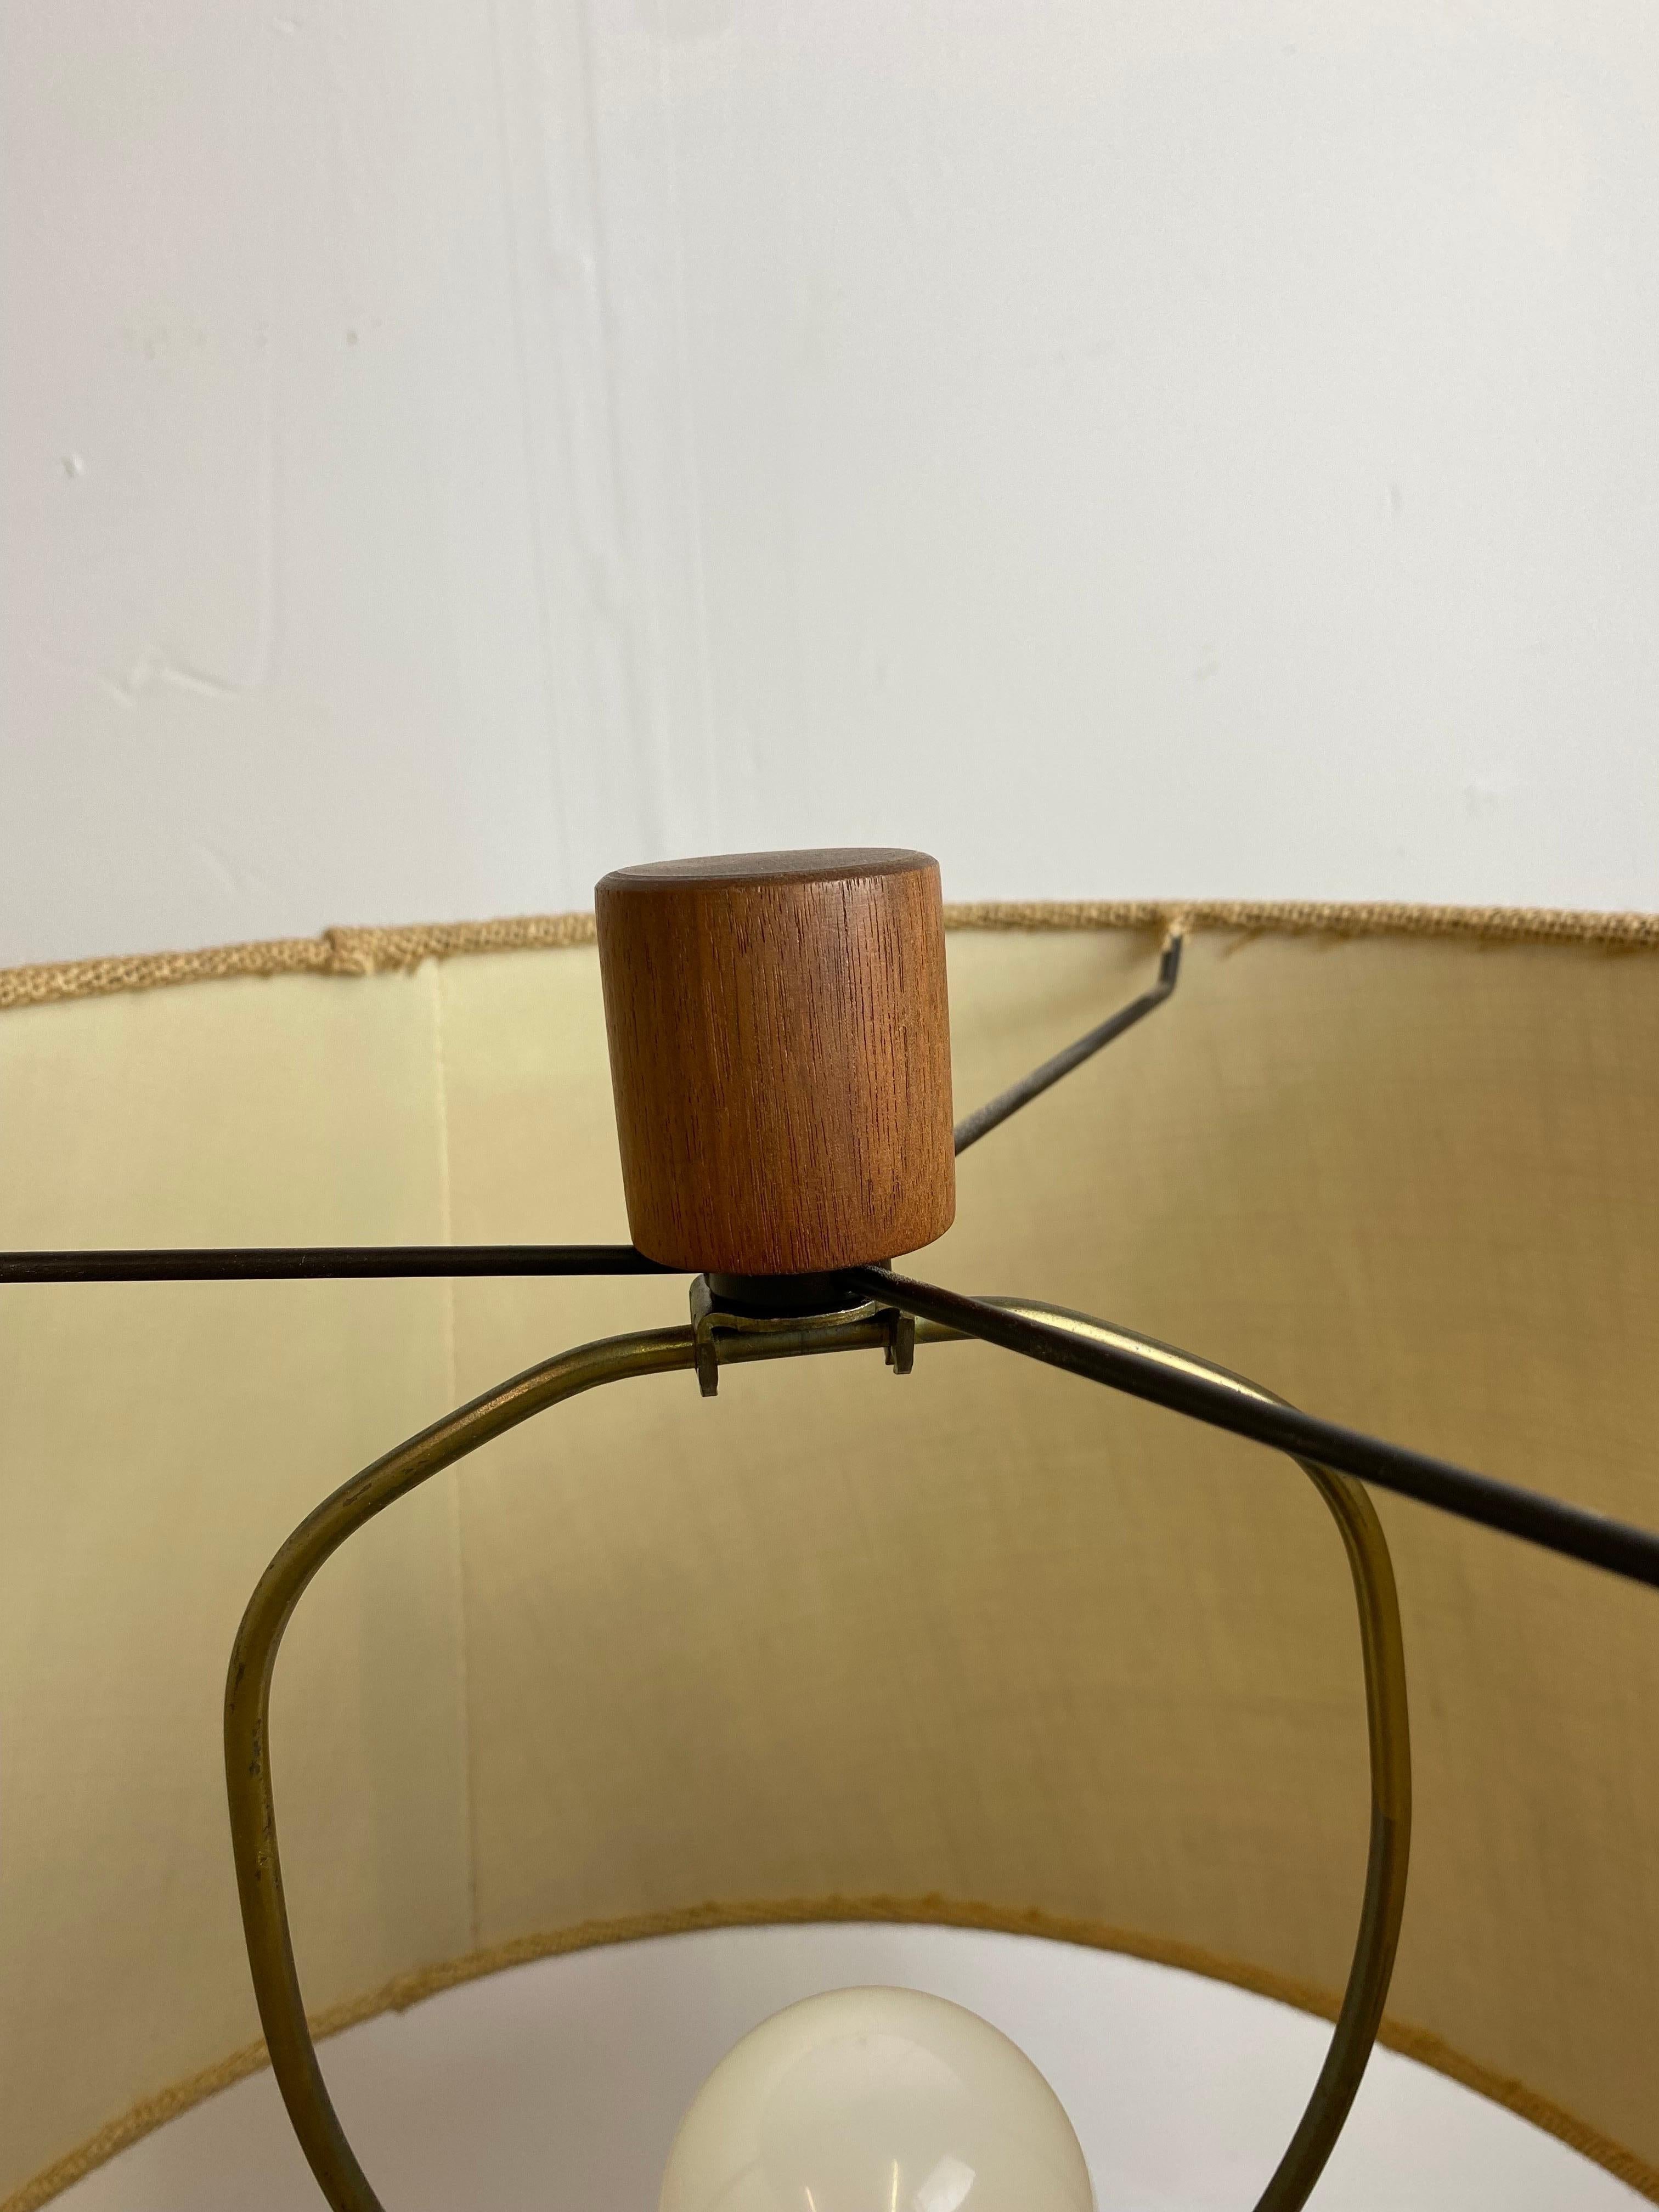 Martz Table Lamp, Marshall Studios In Good Condition For Sale In Raleigh, NC